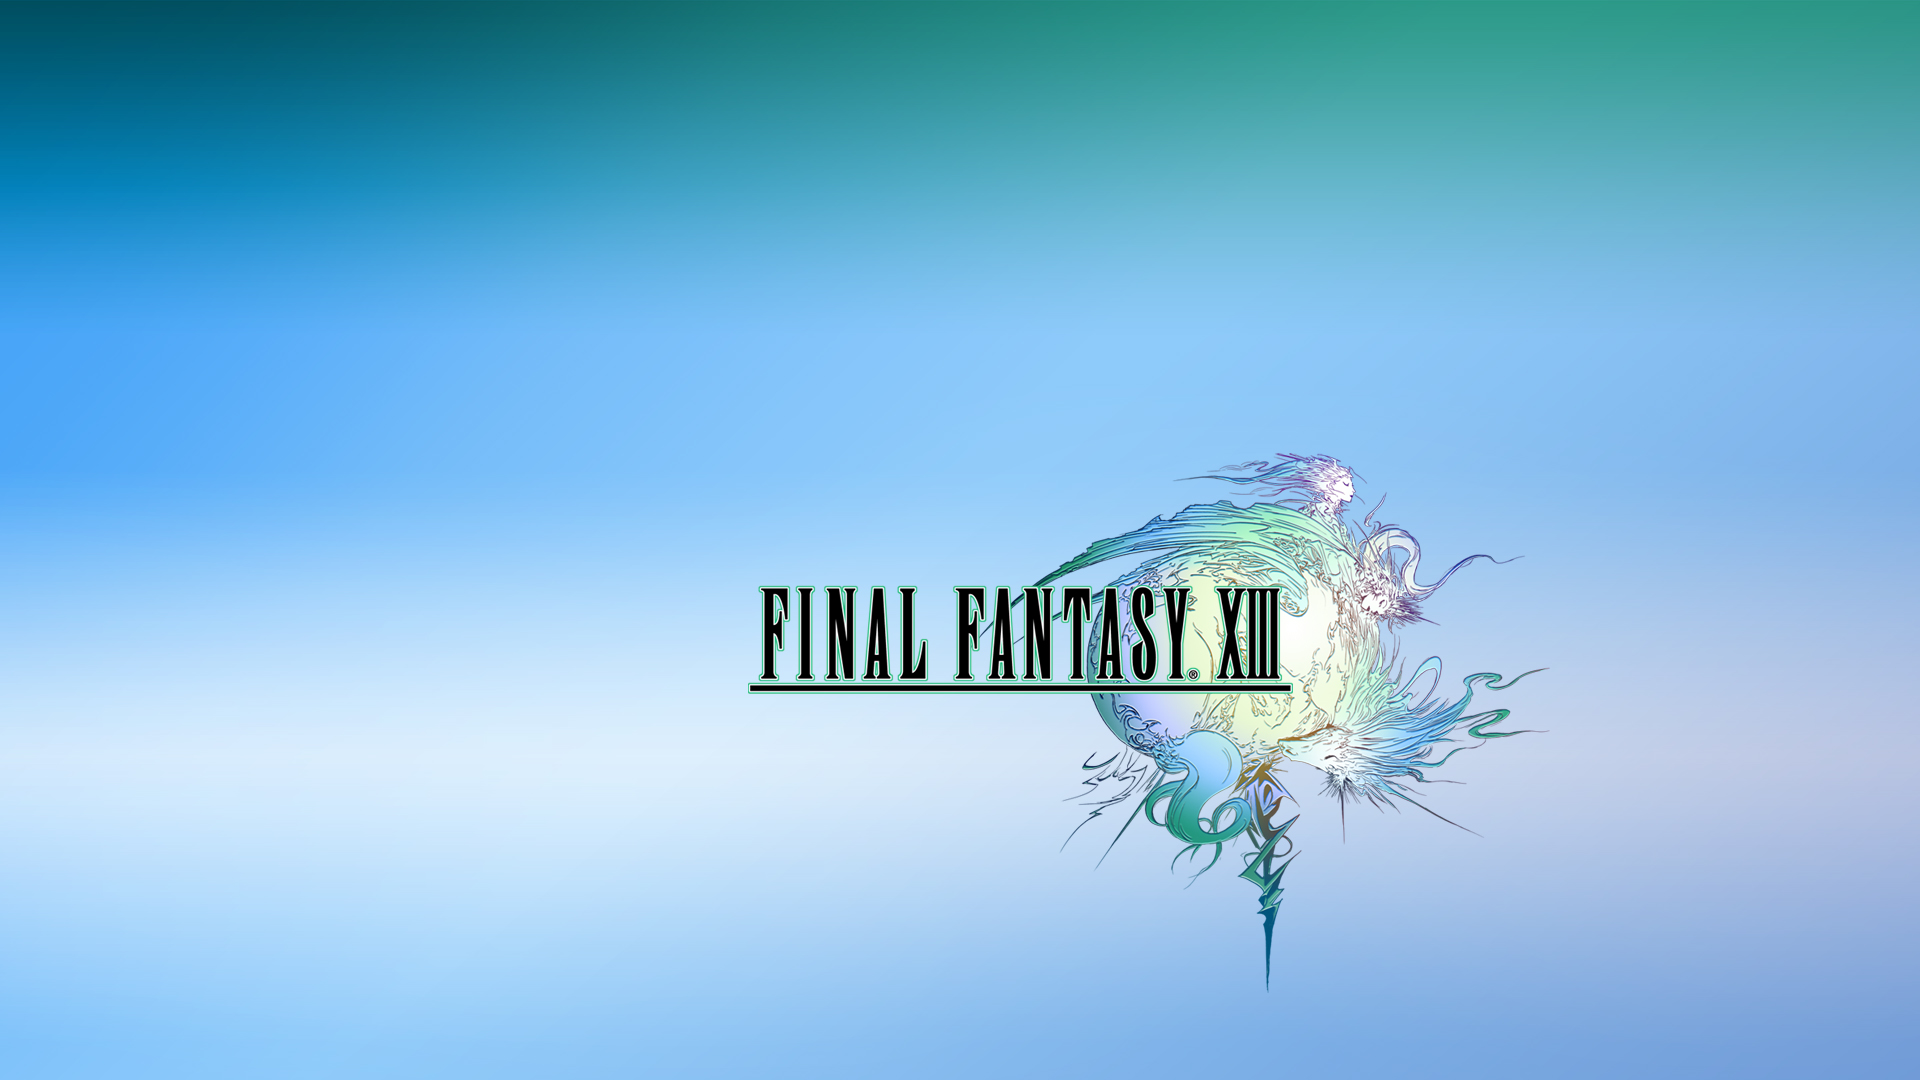 3006259 1920x1080 Final Fantasy XIII  Rare Gallery HD Wallpapers